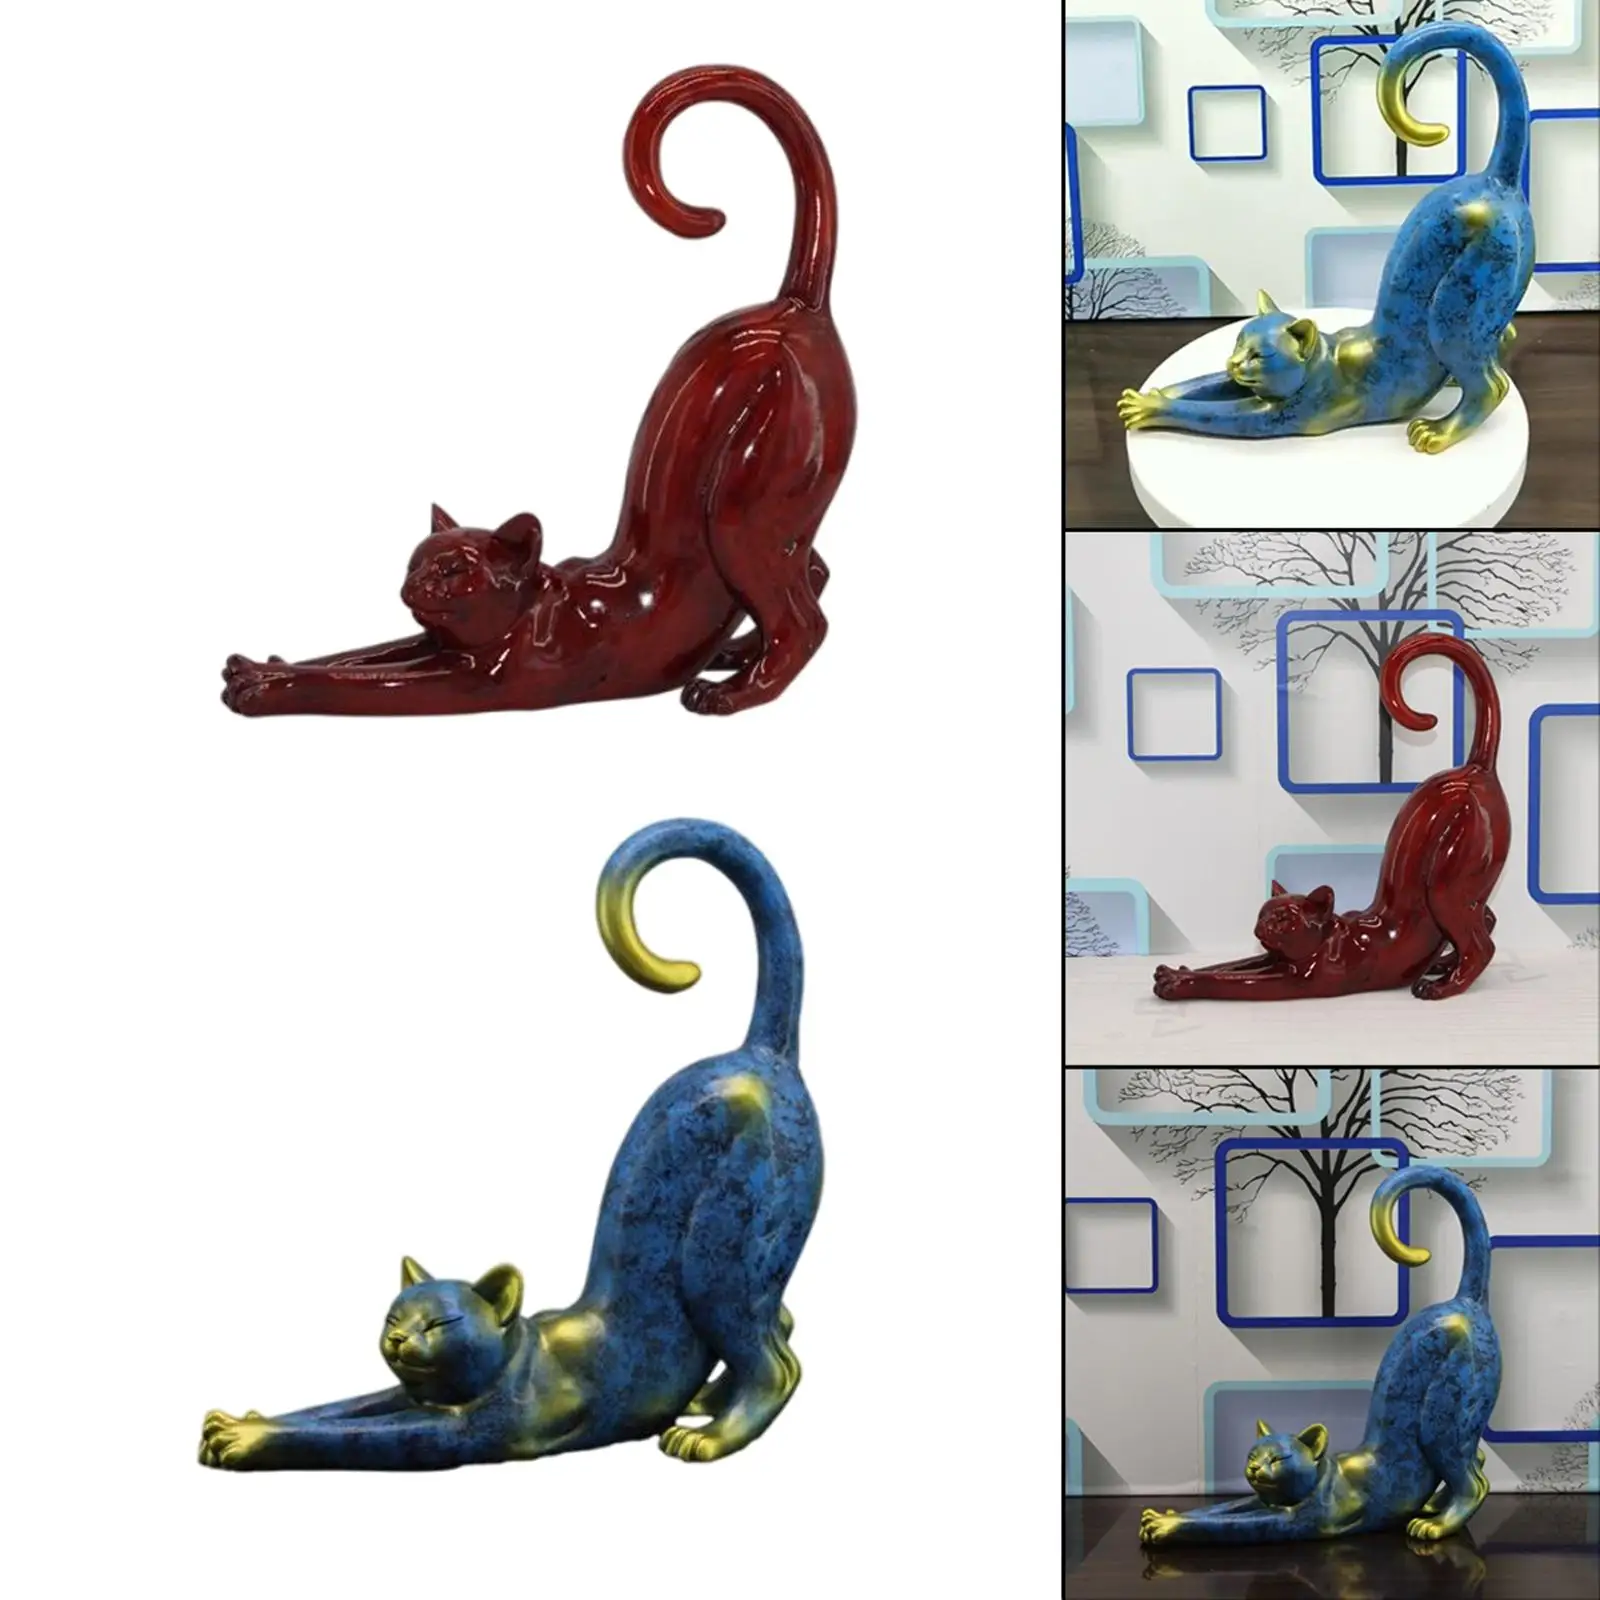 Set of 2 Resin Cat Figurine Simulated Bedroom Office Wedding Decor Gifts